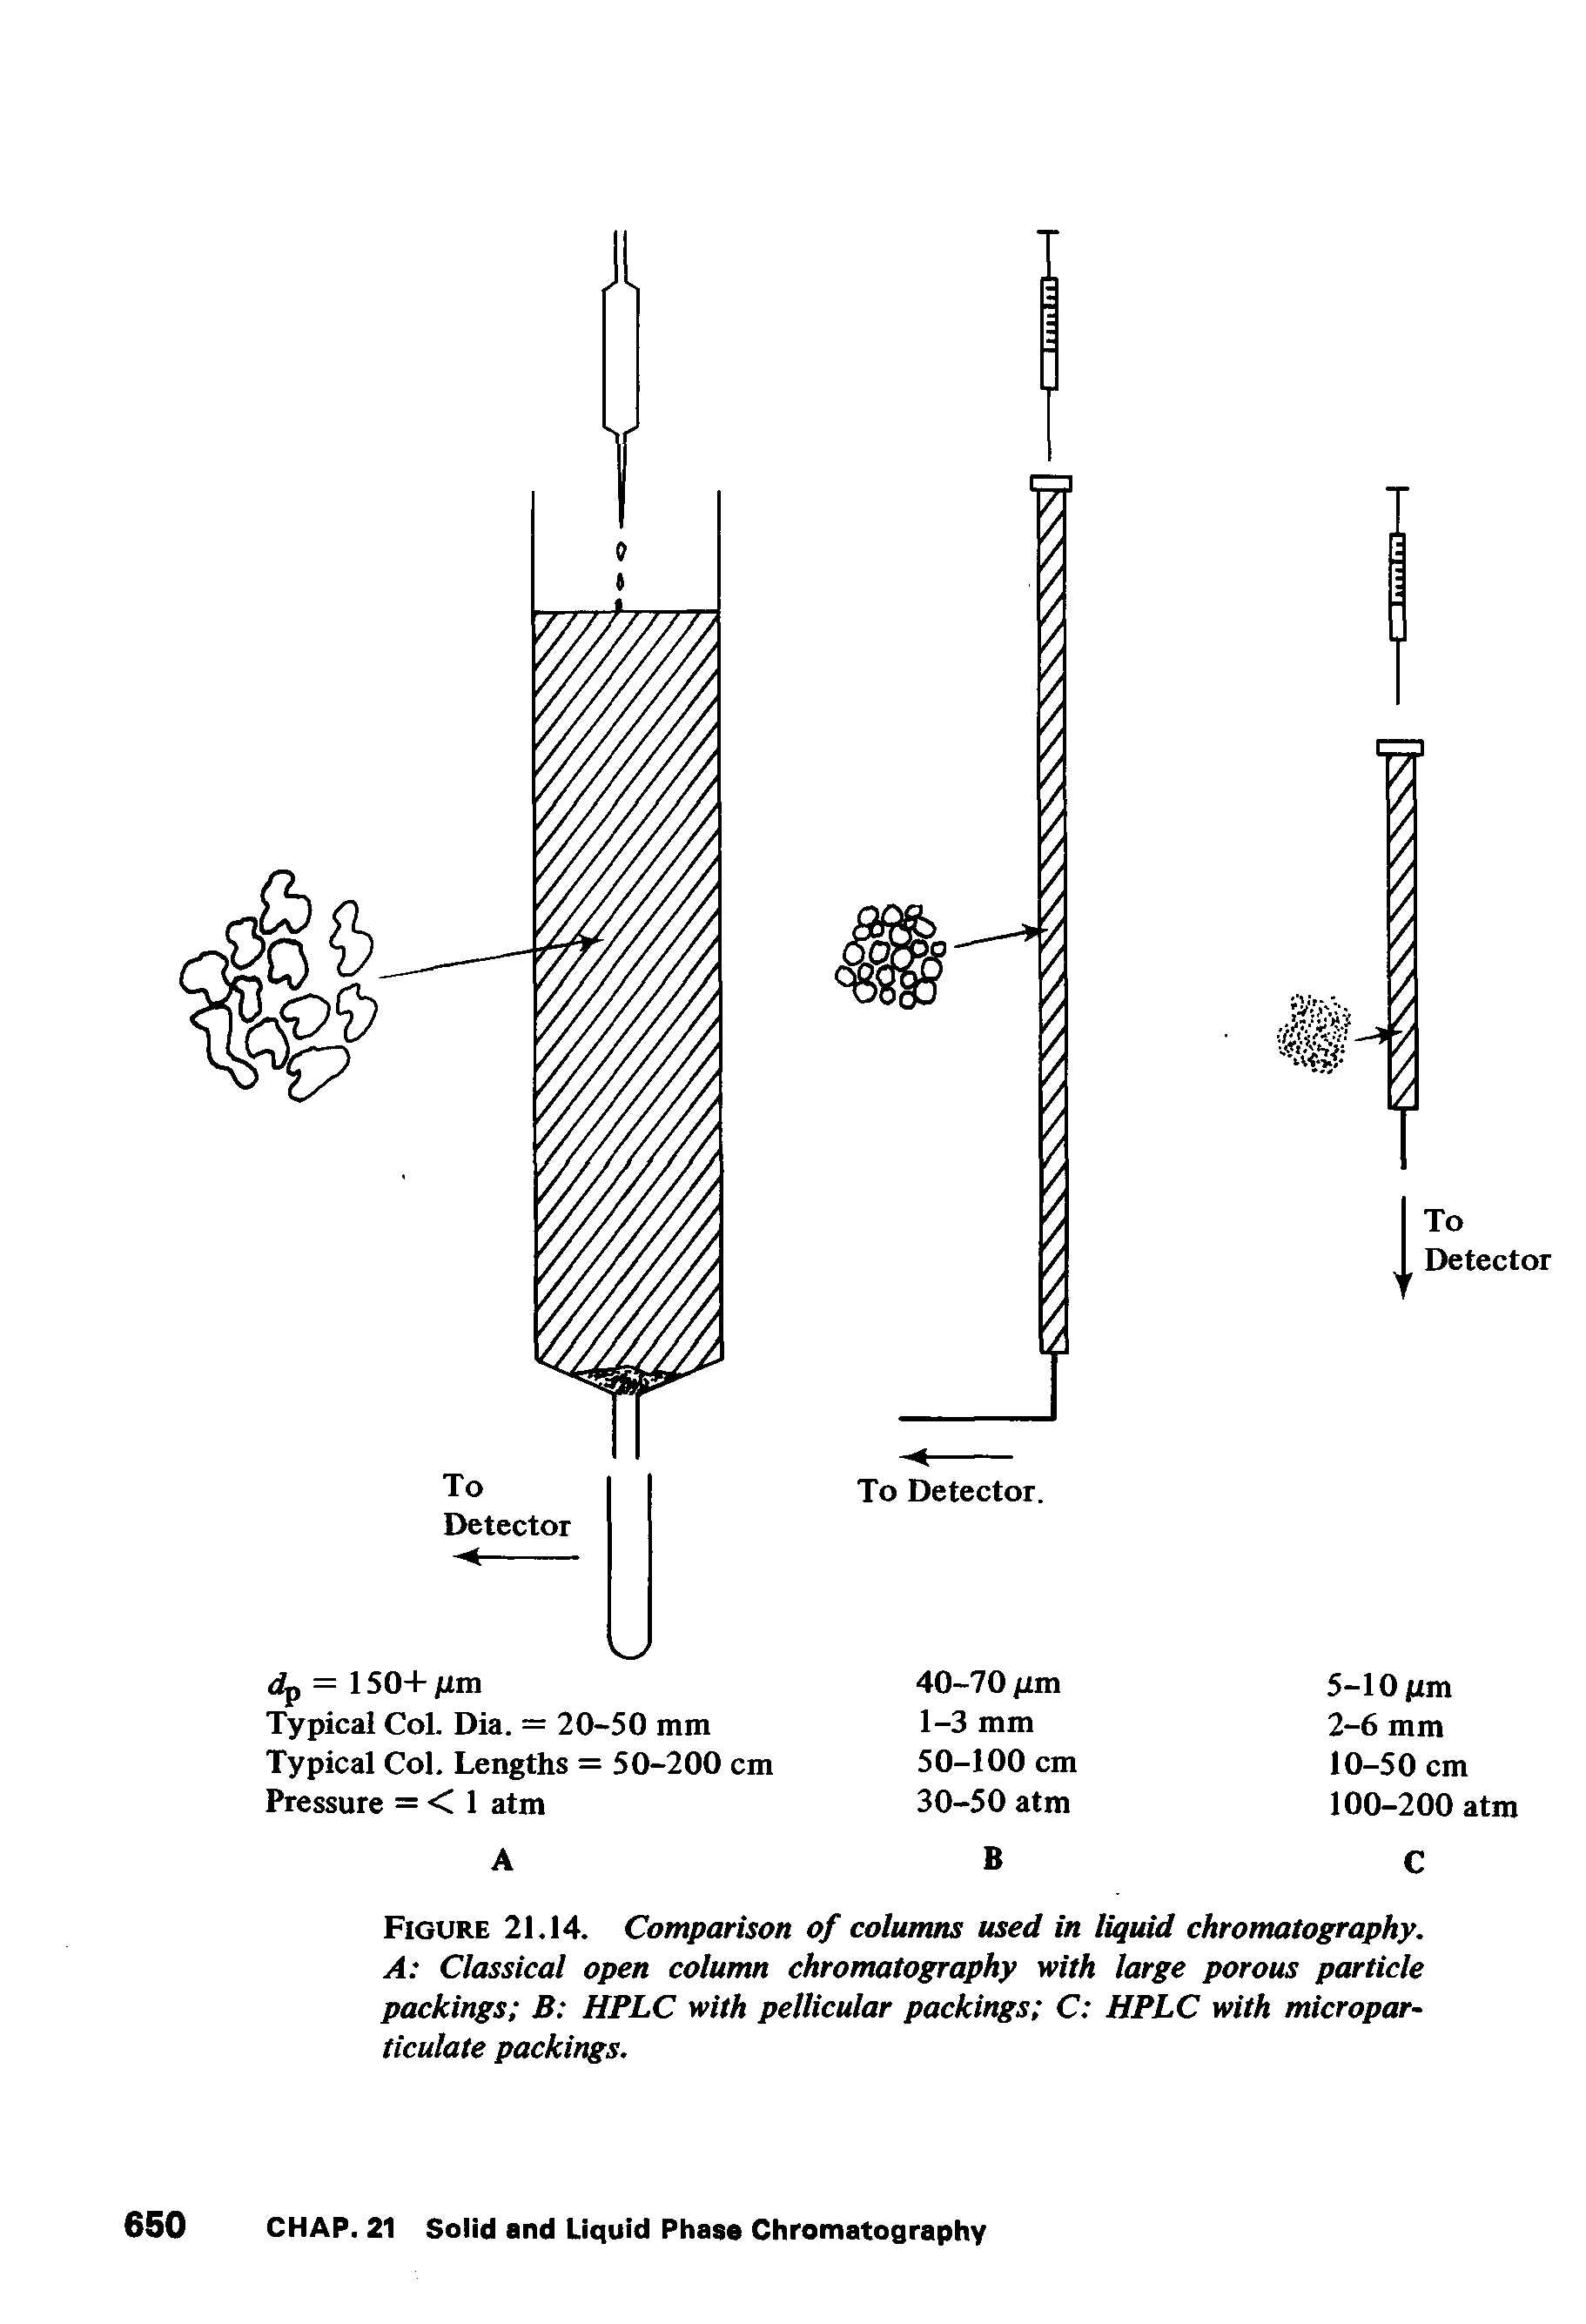 Figure 21.14. Comparison of columns used in liquid chromatography. A Classical open column chromatography with large porous particle packings B HFLC with pellicular packings C HPLC with microparticulate packings.